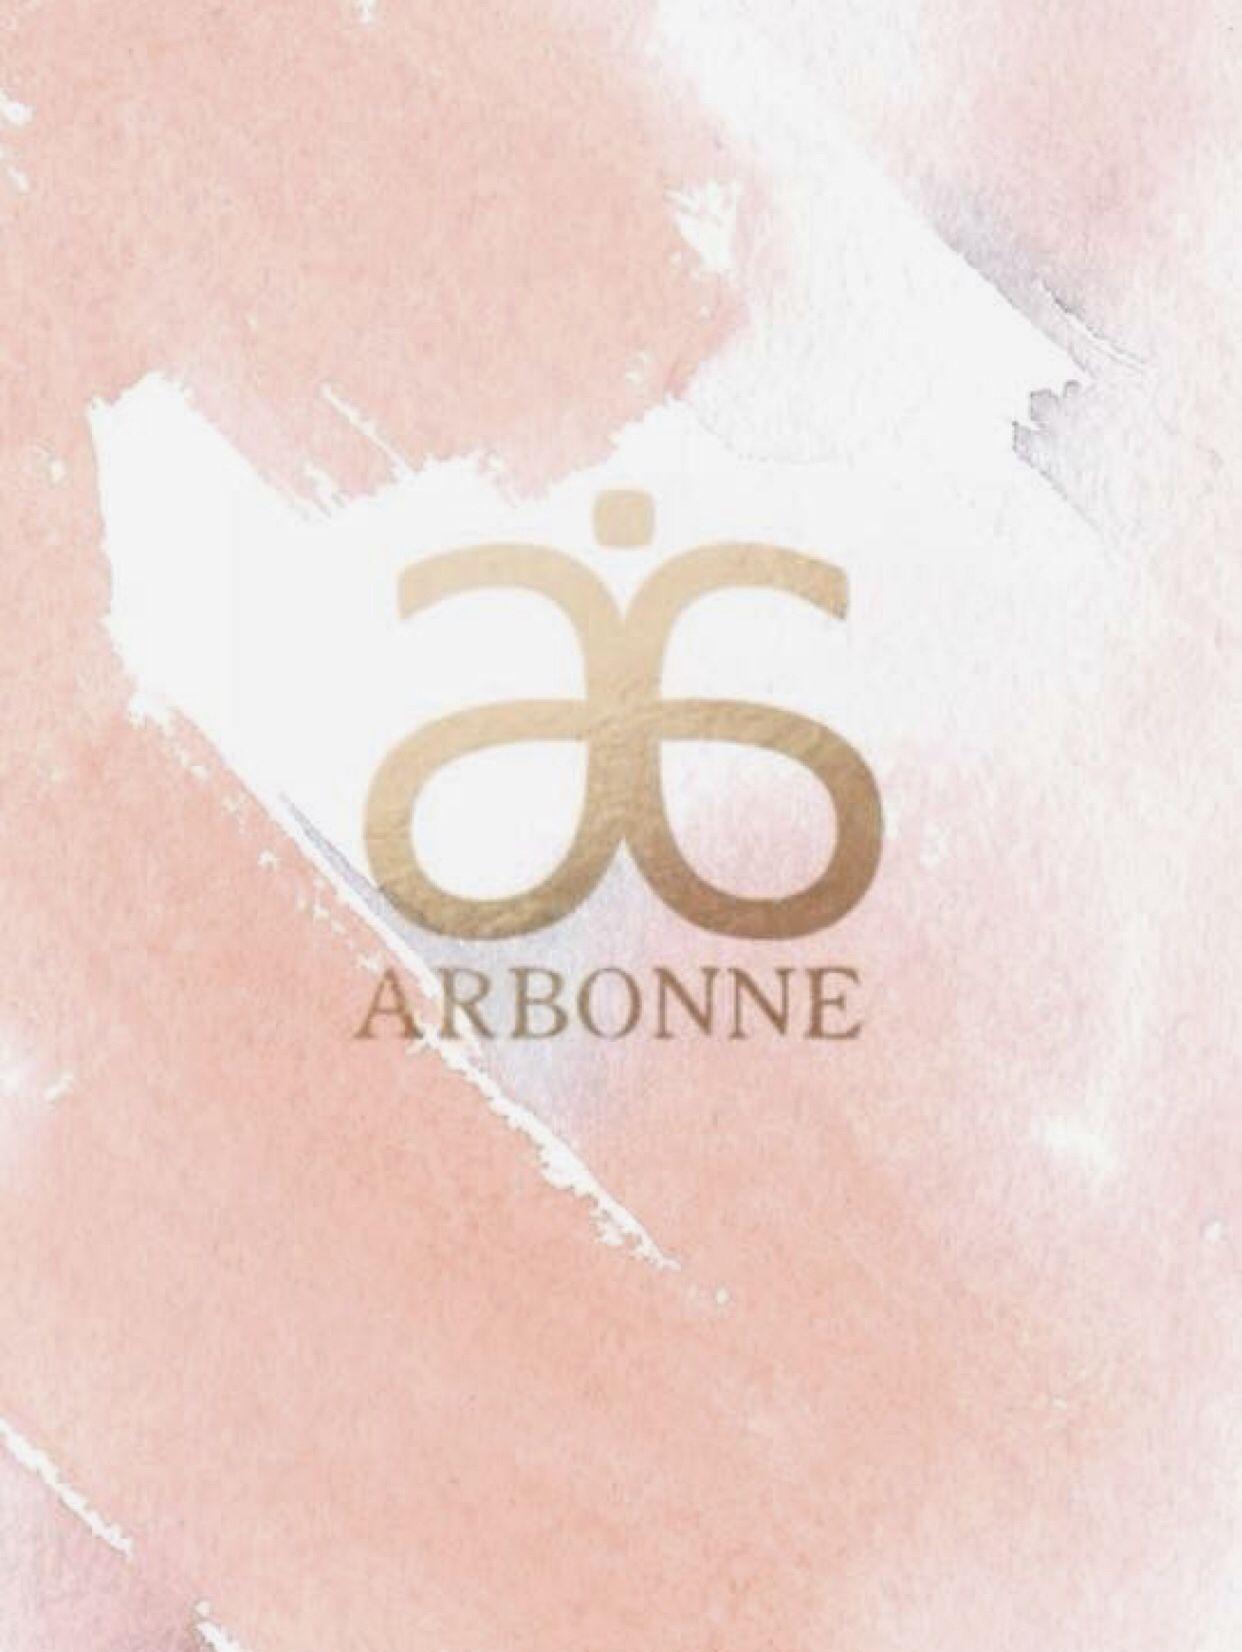 Arbonne Logo - Pin by Riley Kister on A R B O N N E in 2019 | Arbonne business ...